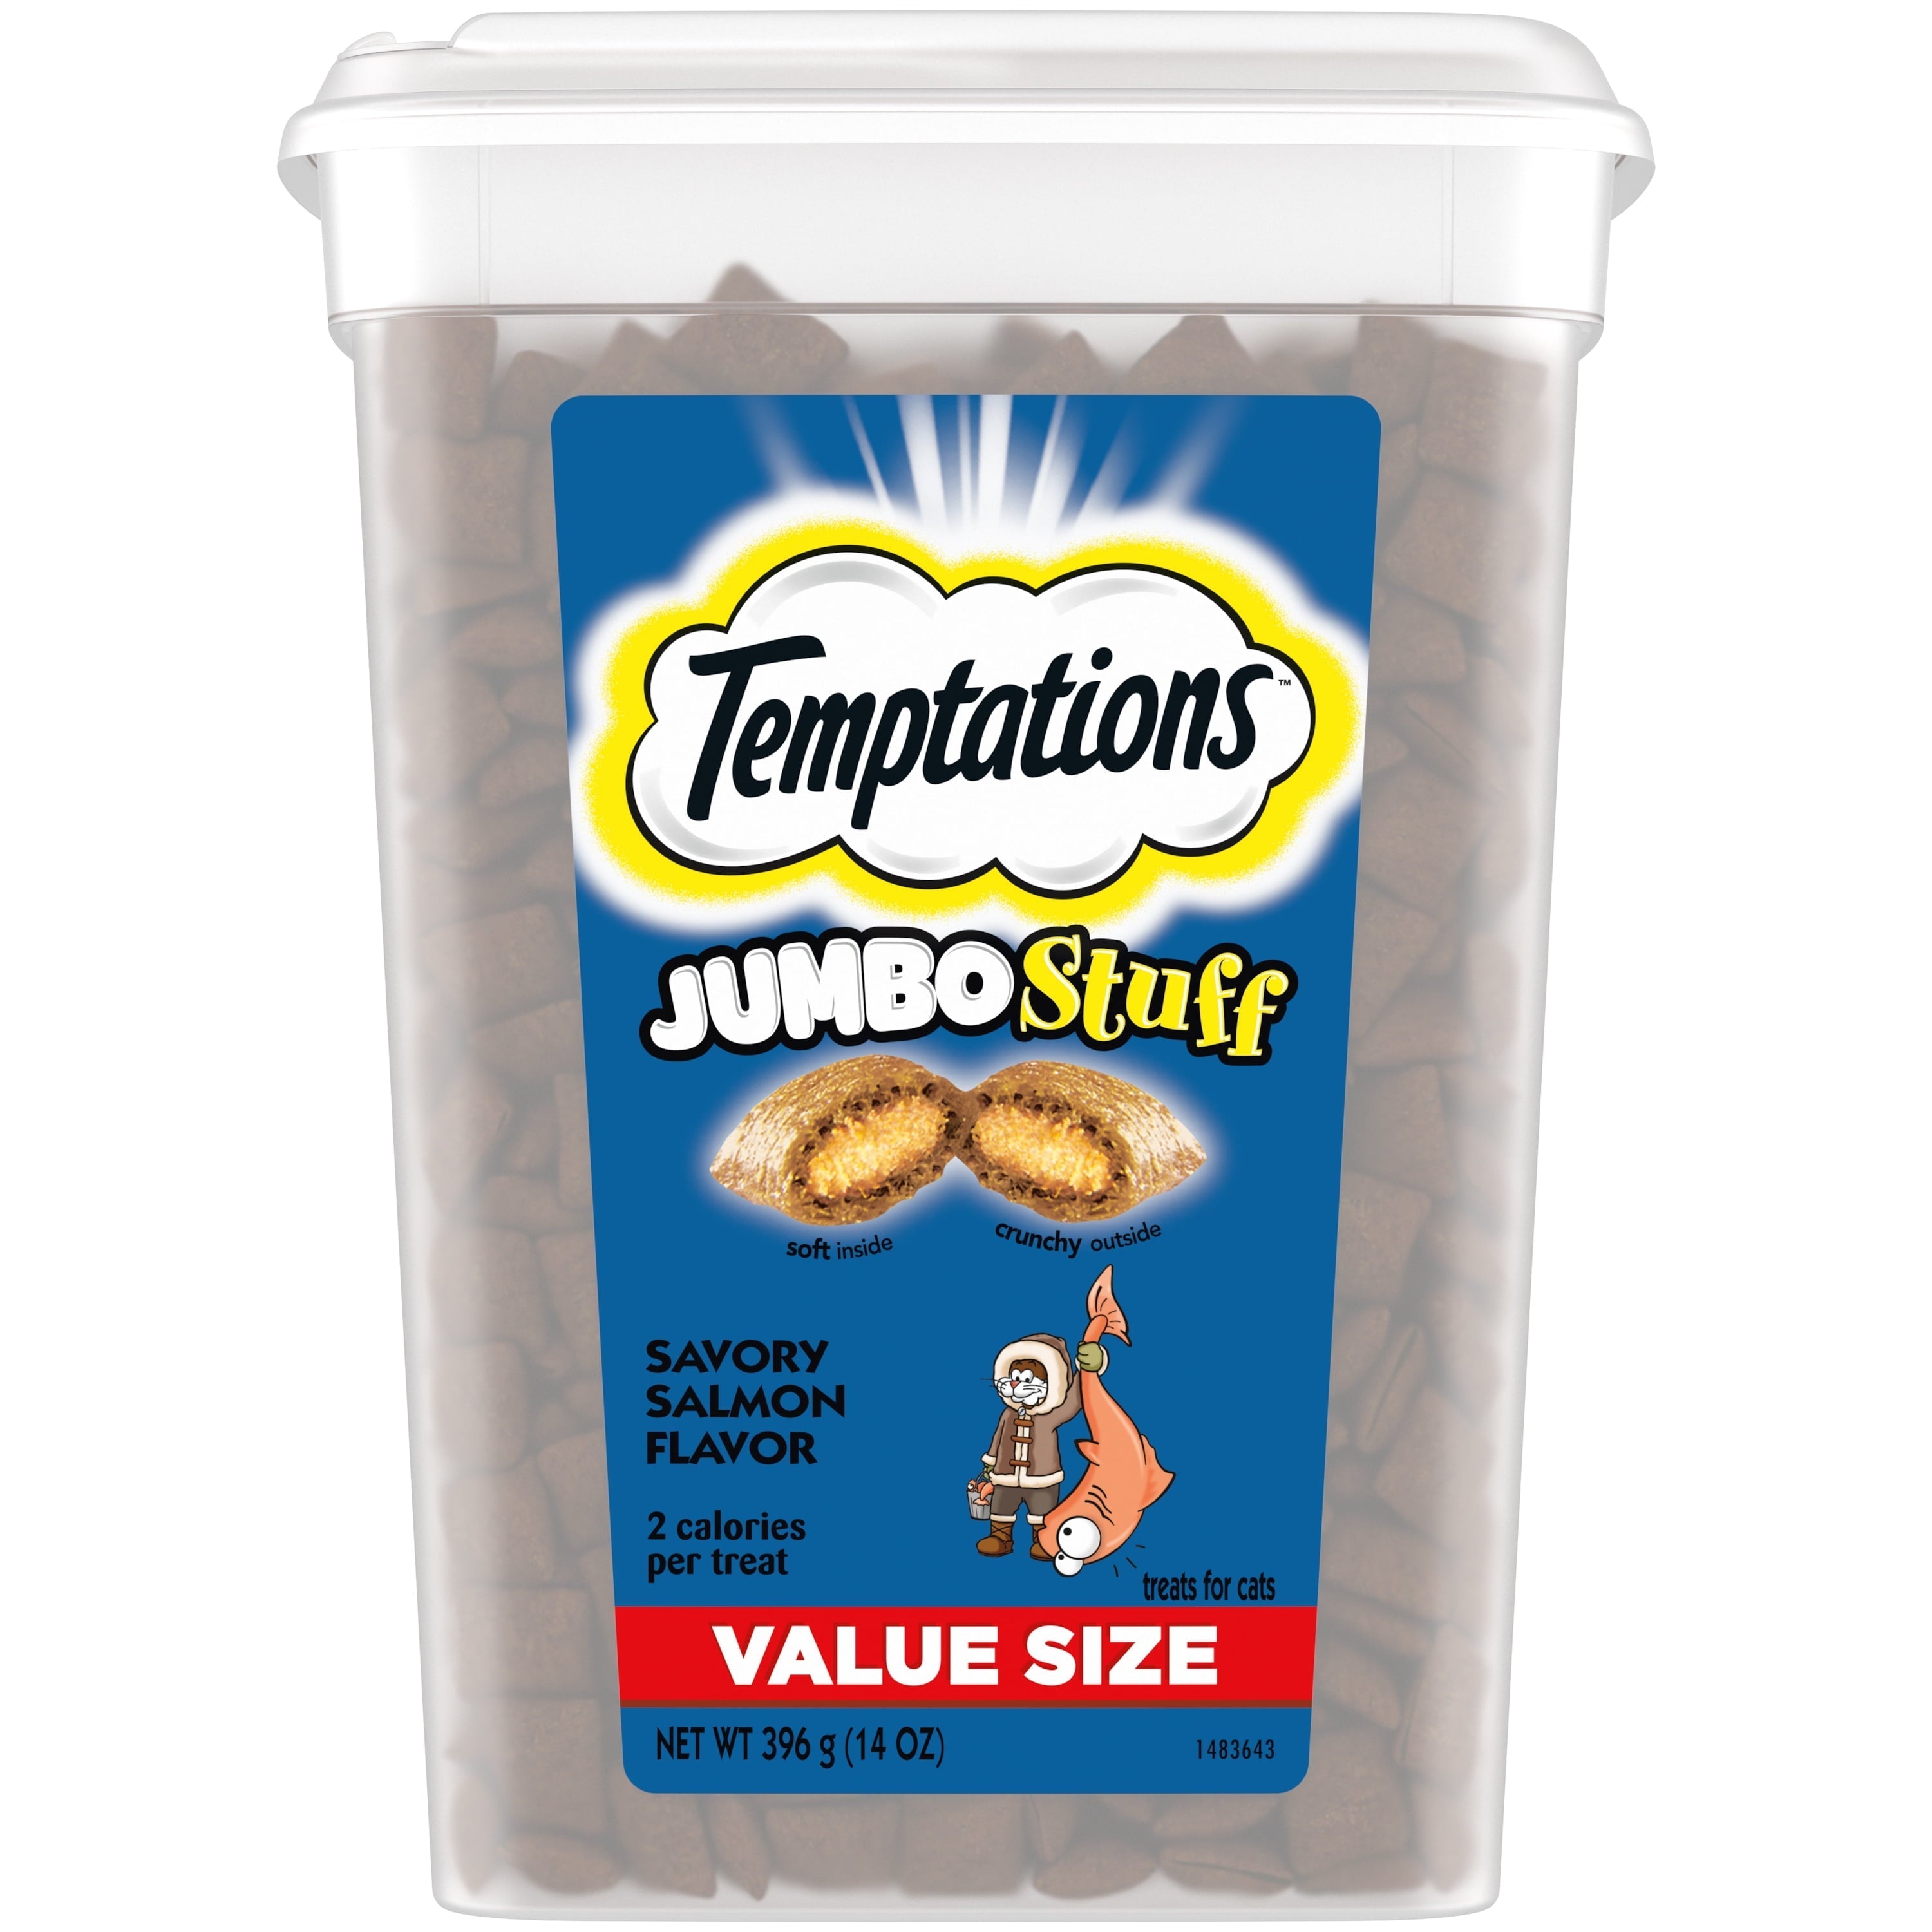 Wholesale prices with free shipping all over United States Temptations Jumbo Stuff Cat Treats, Savory Salmon Flavor, 14 oz. Tub - Steven Deals